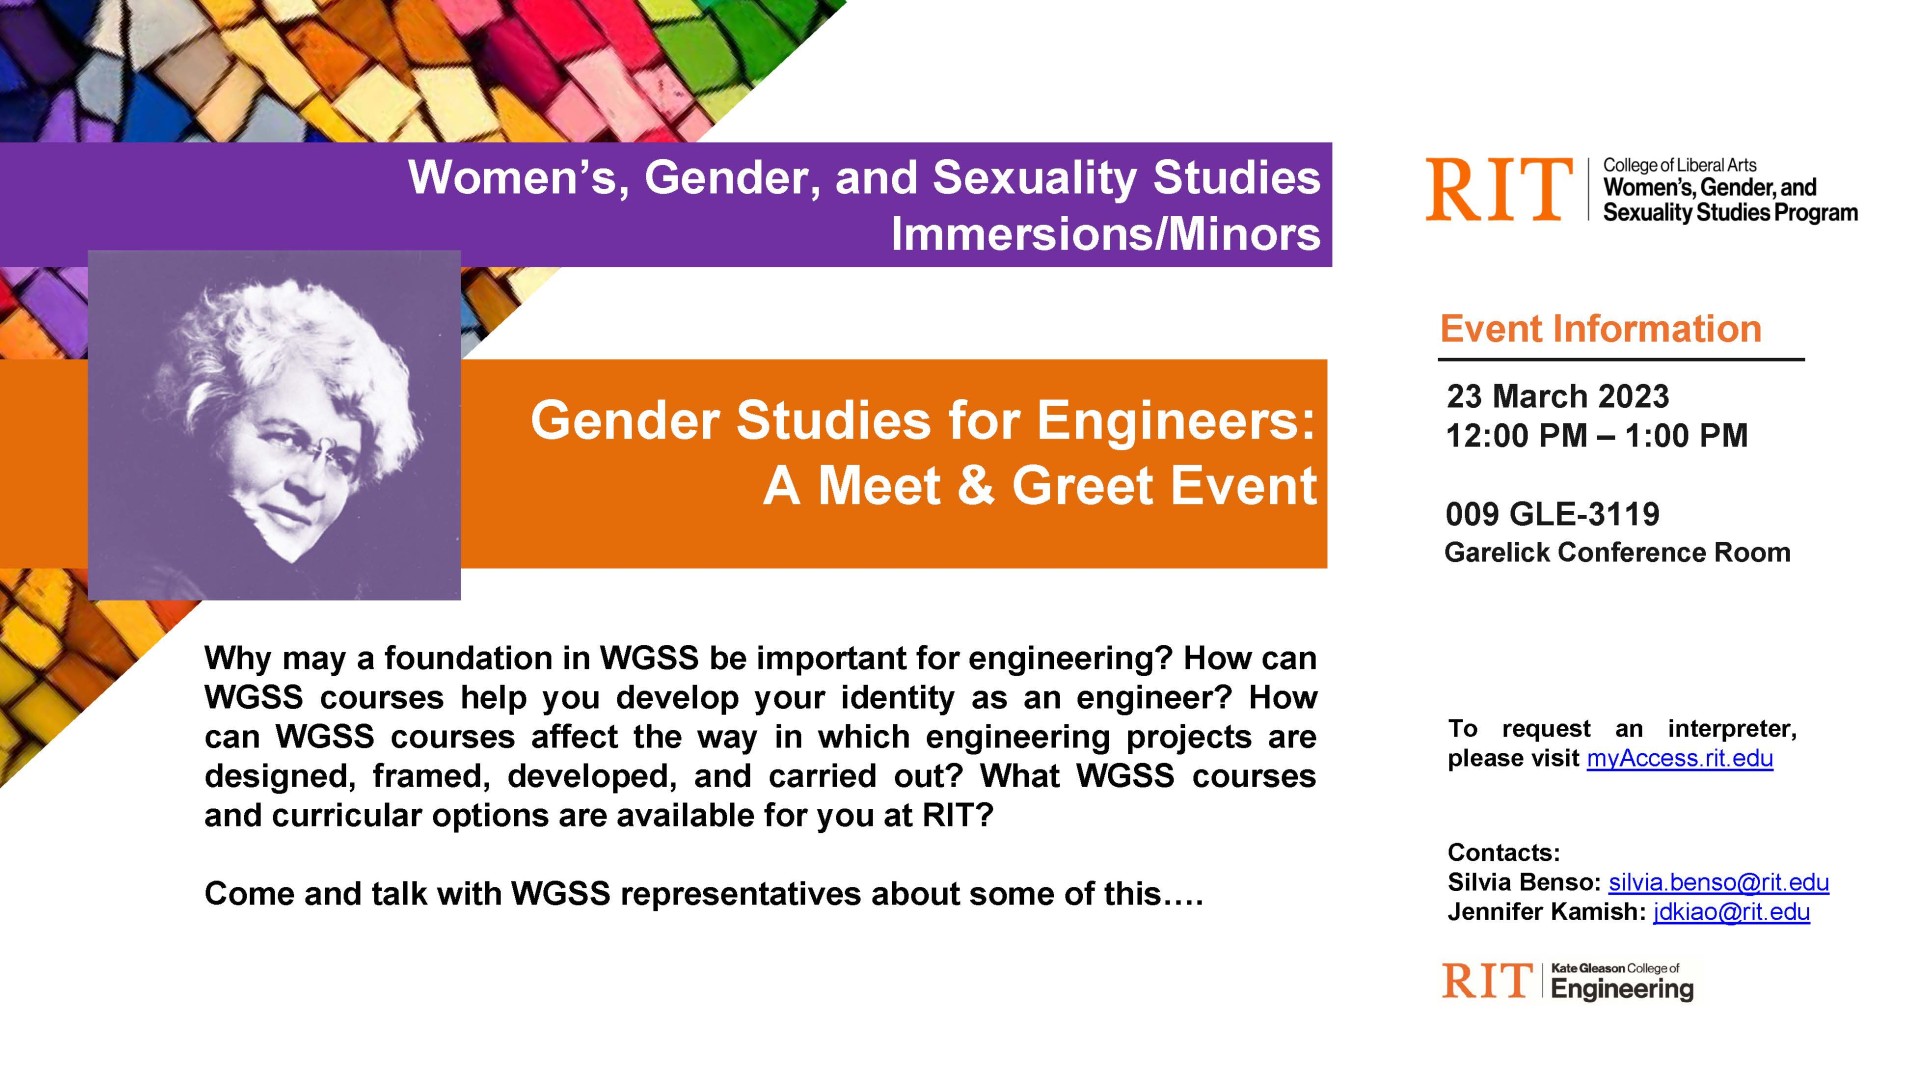 Meet & Greet with Engineering students interested in WGSS--March 23, 12:00-1:00